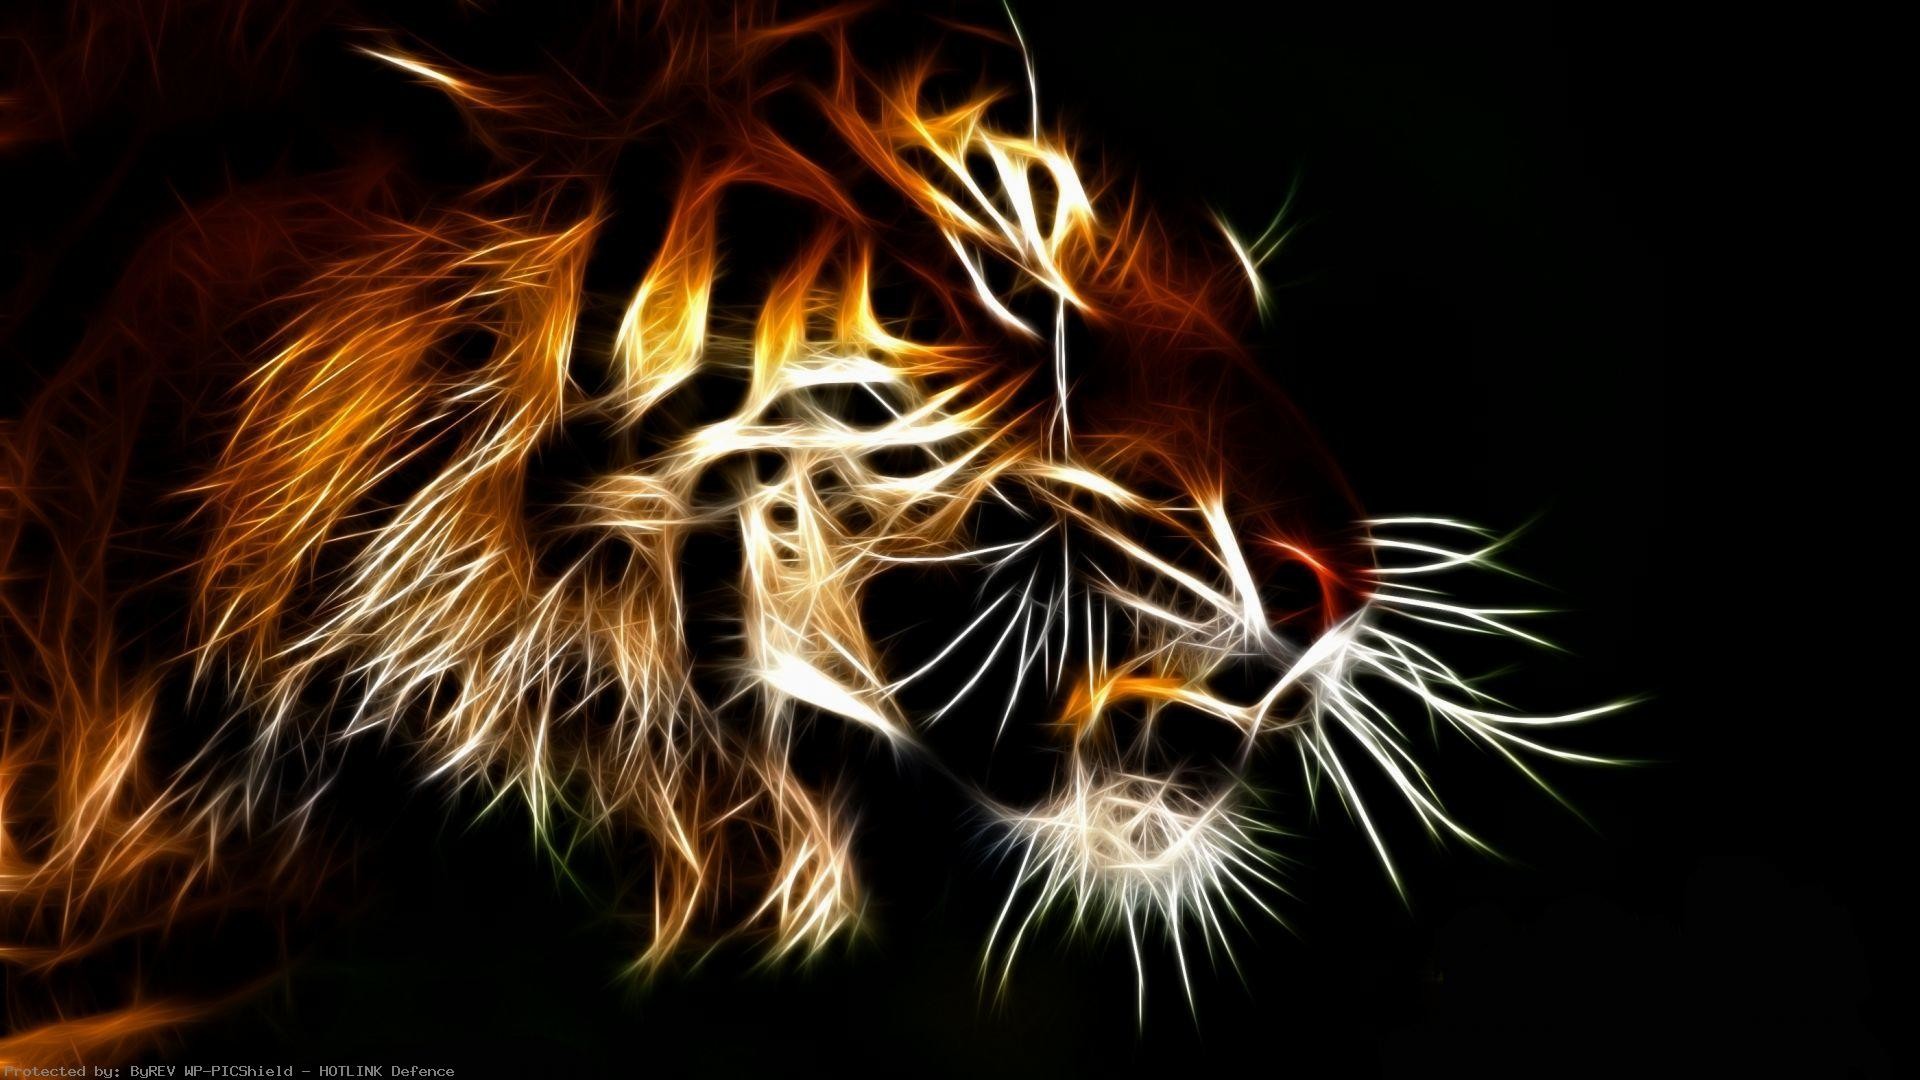 1920x1080 Cool-Neon-Backgrounds-White-Tiger-Translucent-tiger-wallpaper-